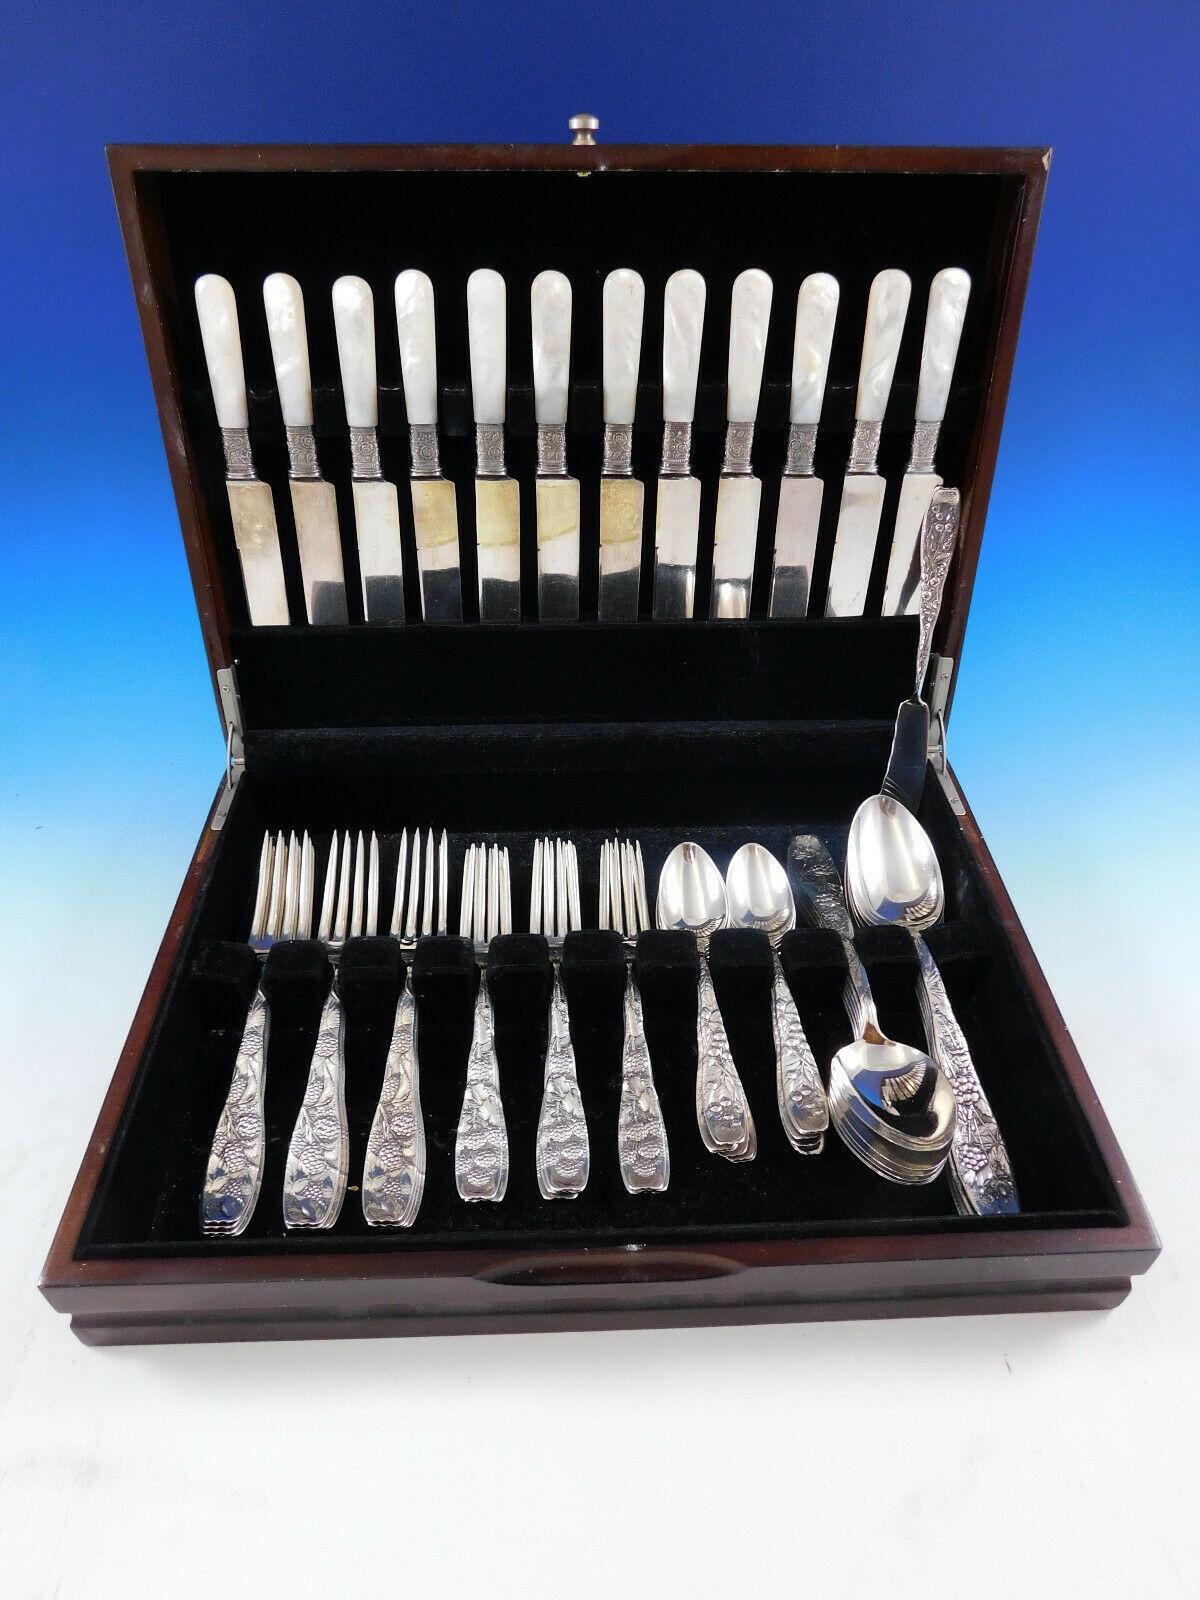 Rare multi-motif Berry by Whiting, circa 1880, sterling silver Flatware set - 60 pieces (including Mother of Pearl Knives). This pattern features a variety of dimensional, finely detailed fruit motifs on intricate, geometric backgrounds. This set